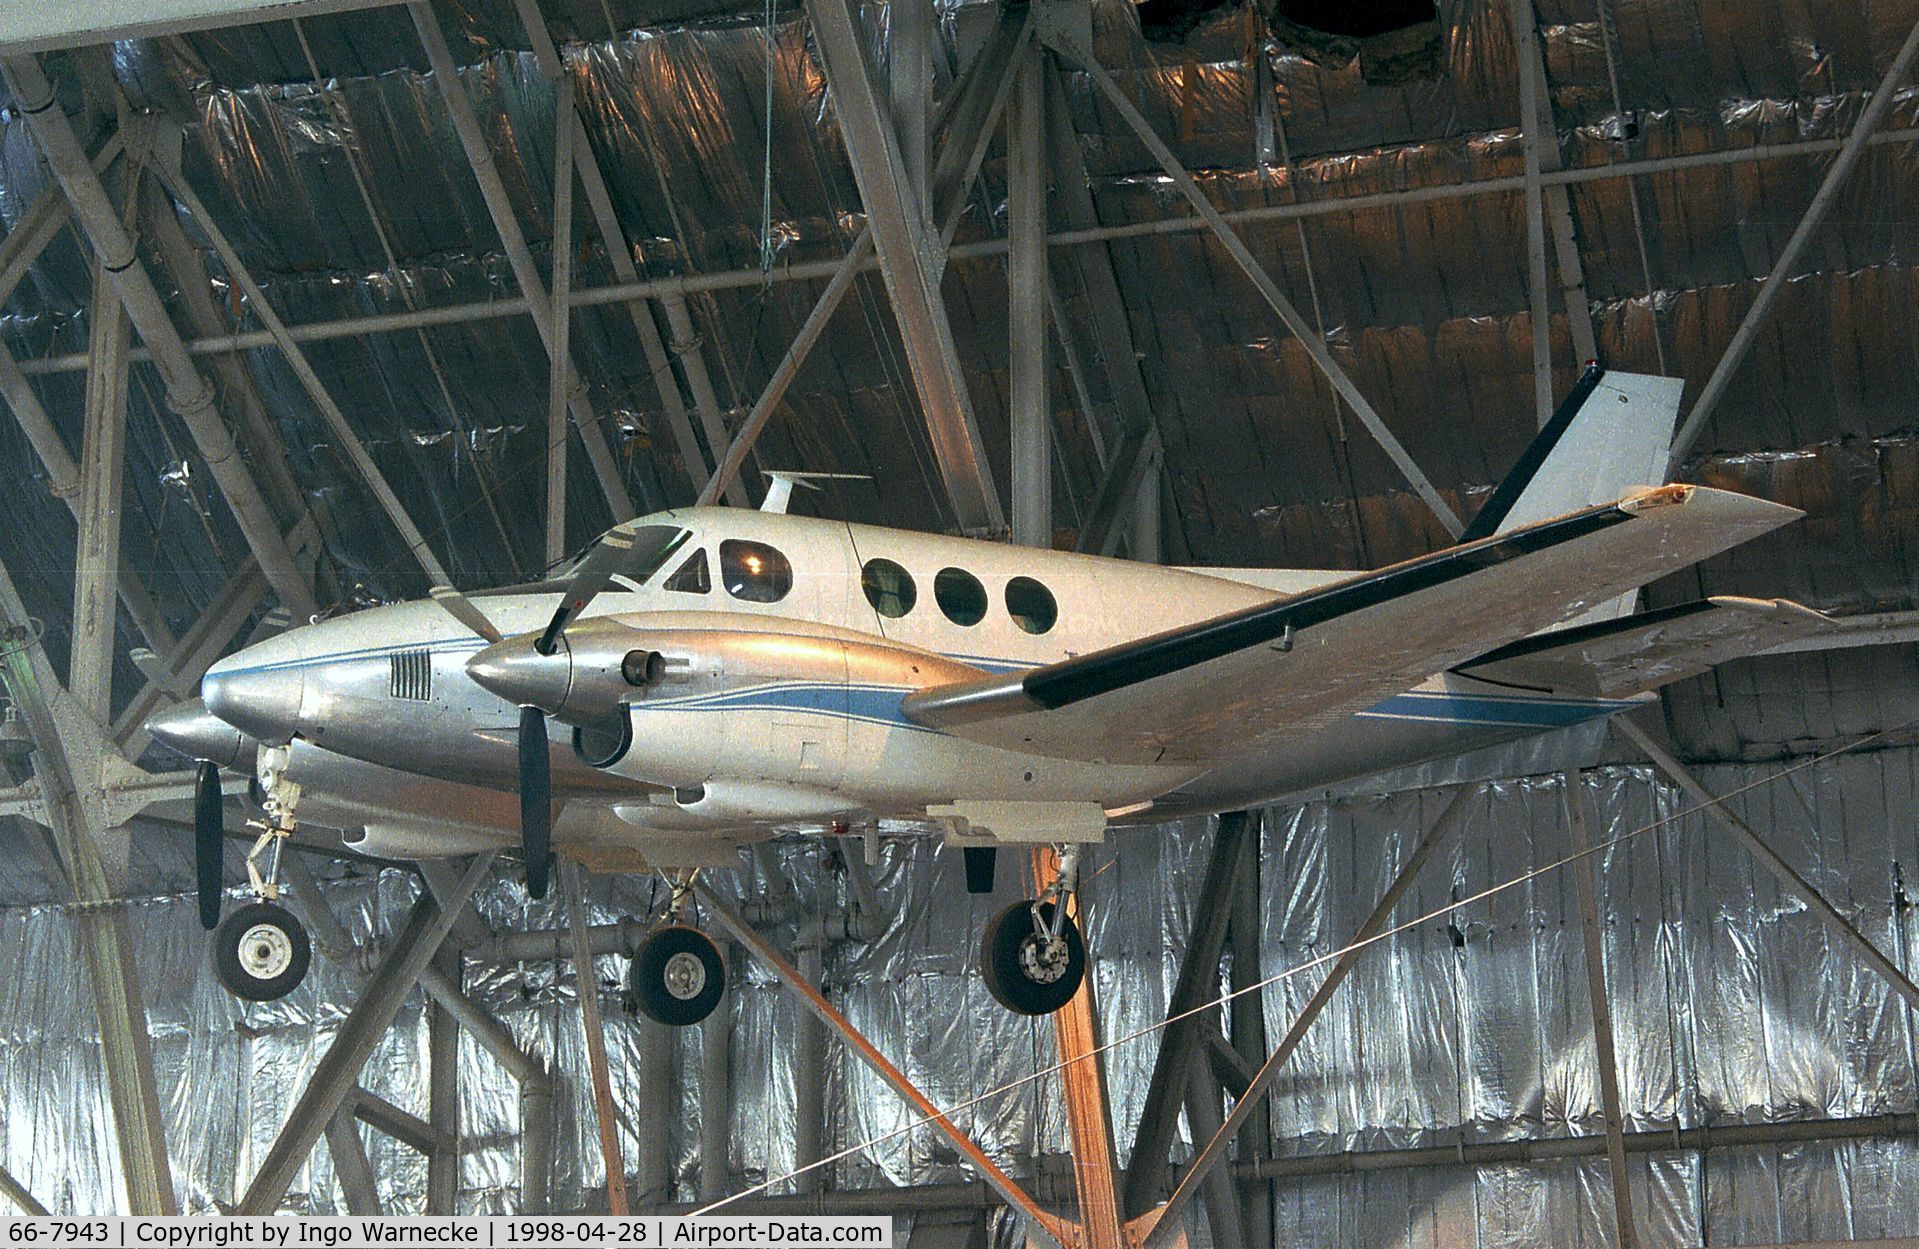 66-7943, 1966 Beech VC-6A King Air C/N LJ.91, Beechcraft VC-6A King Air of the USAF at the USAF Museum, Dayton OH